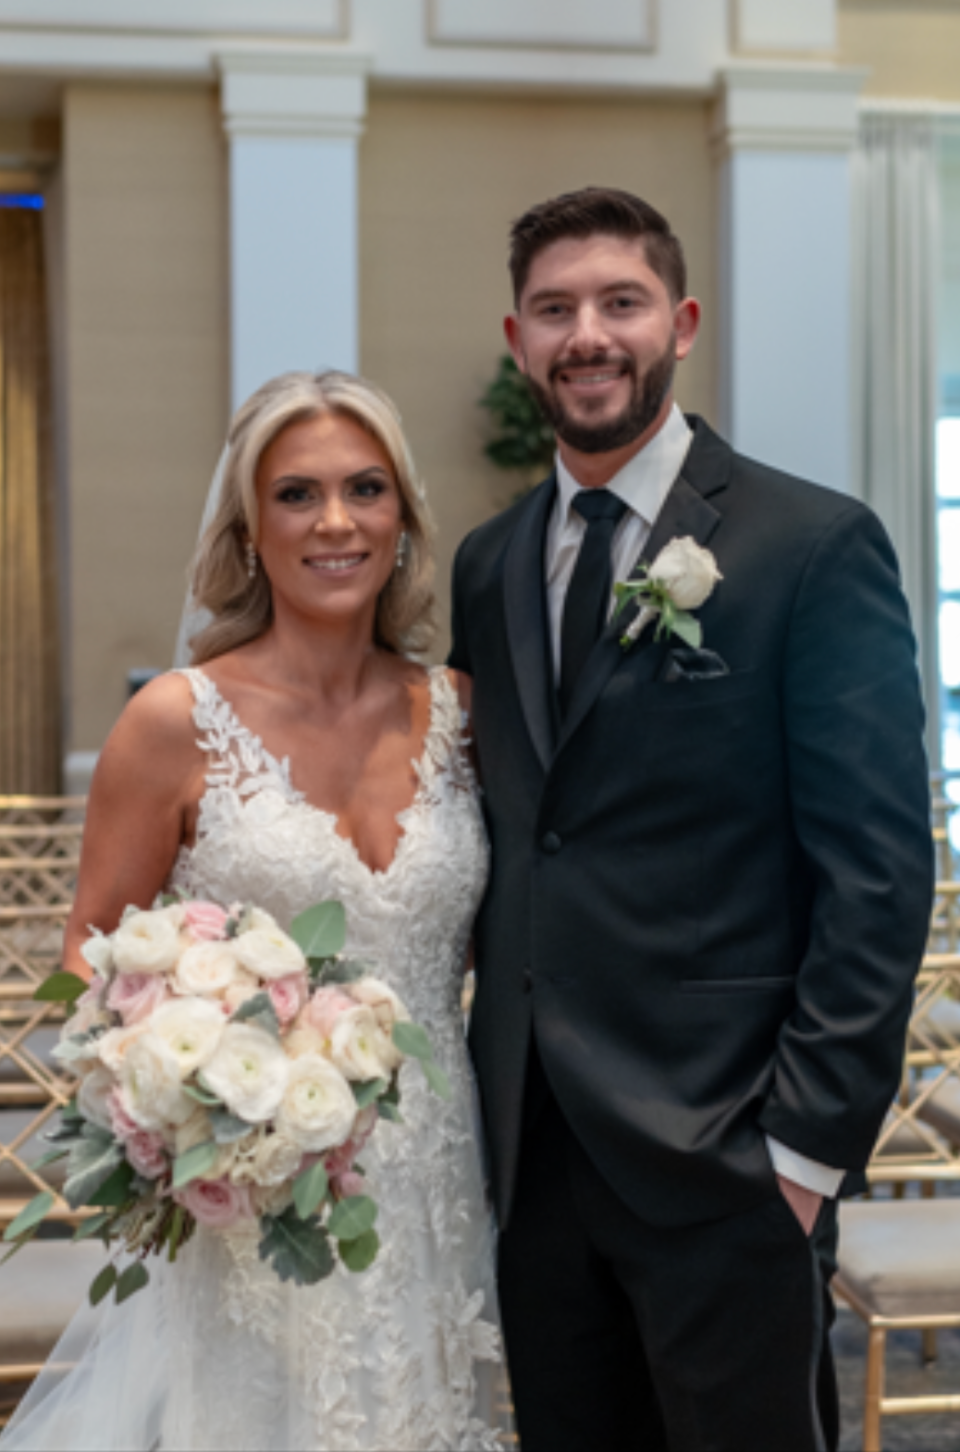 Jillian and Matt Pizzolo on their wedding day last month.